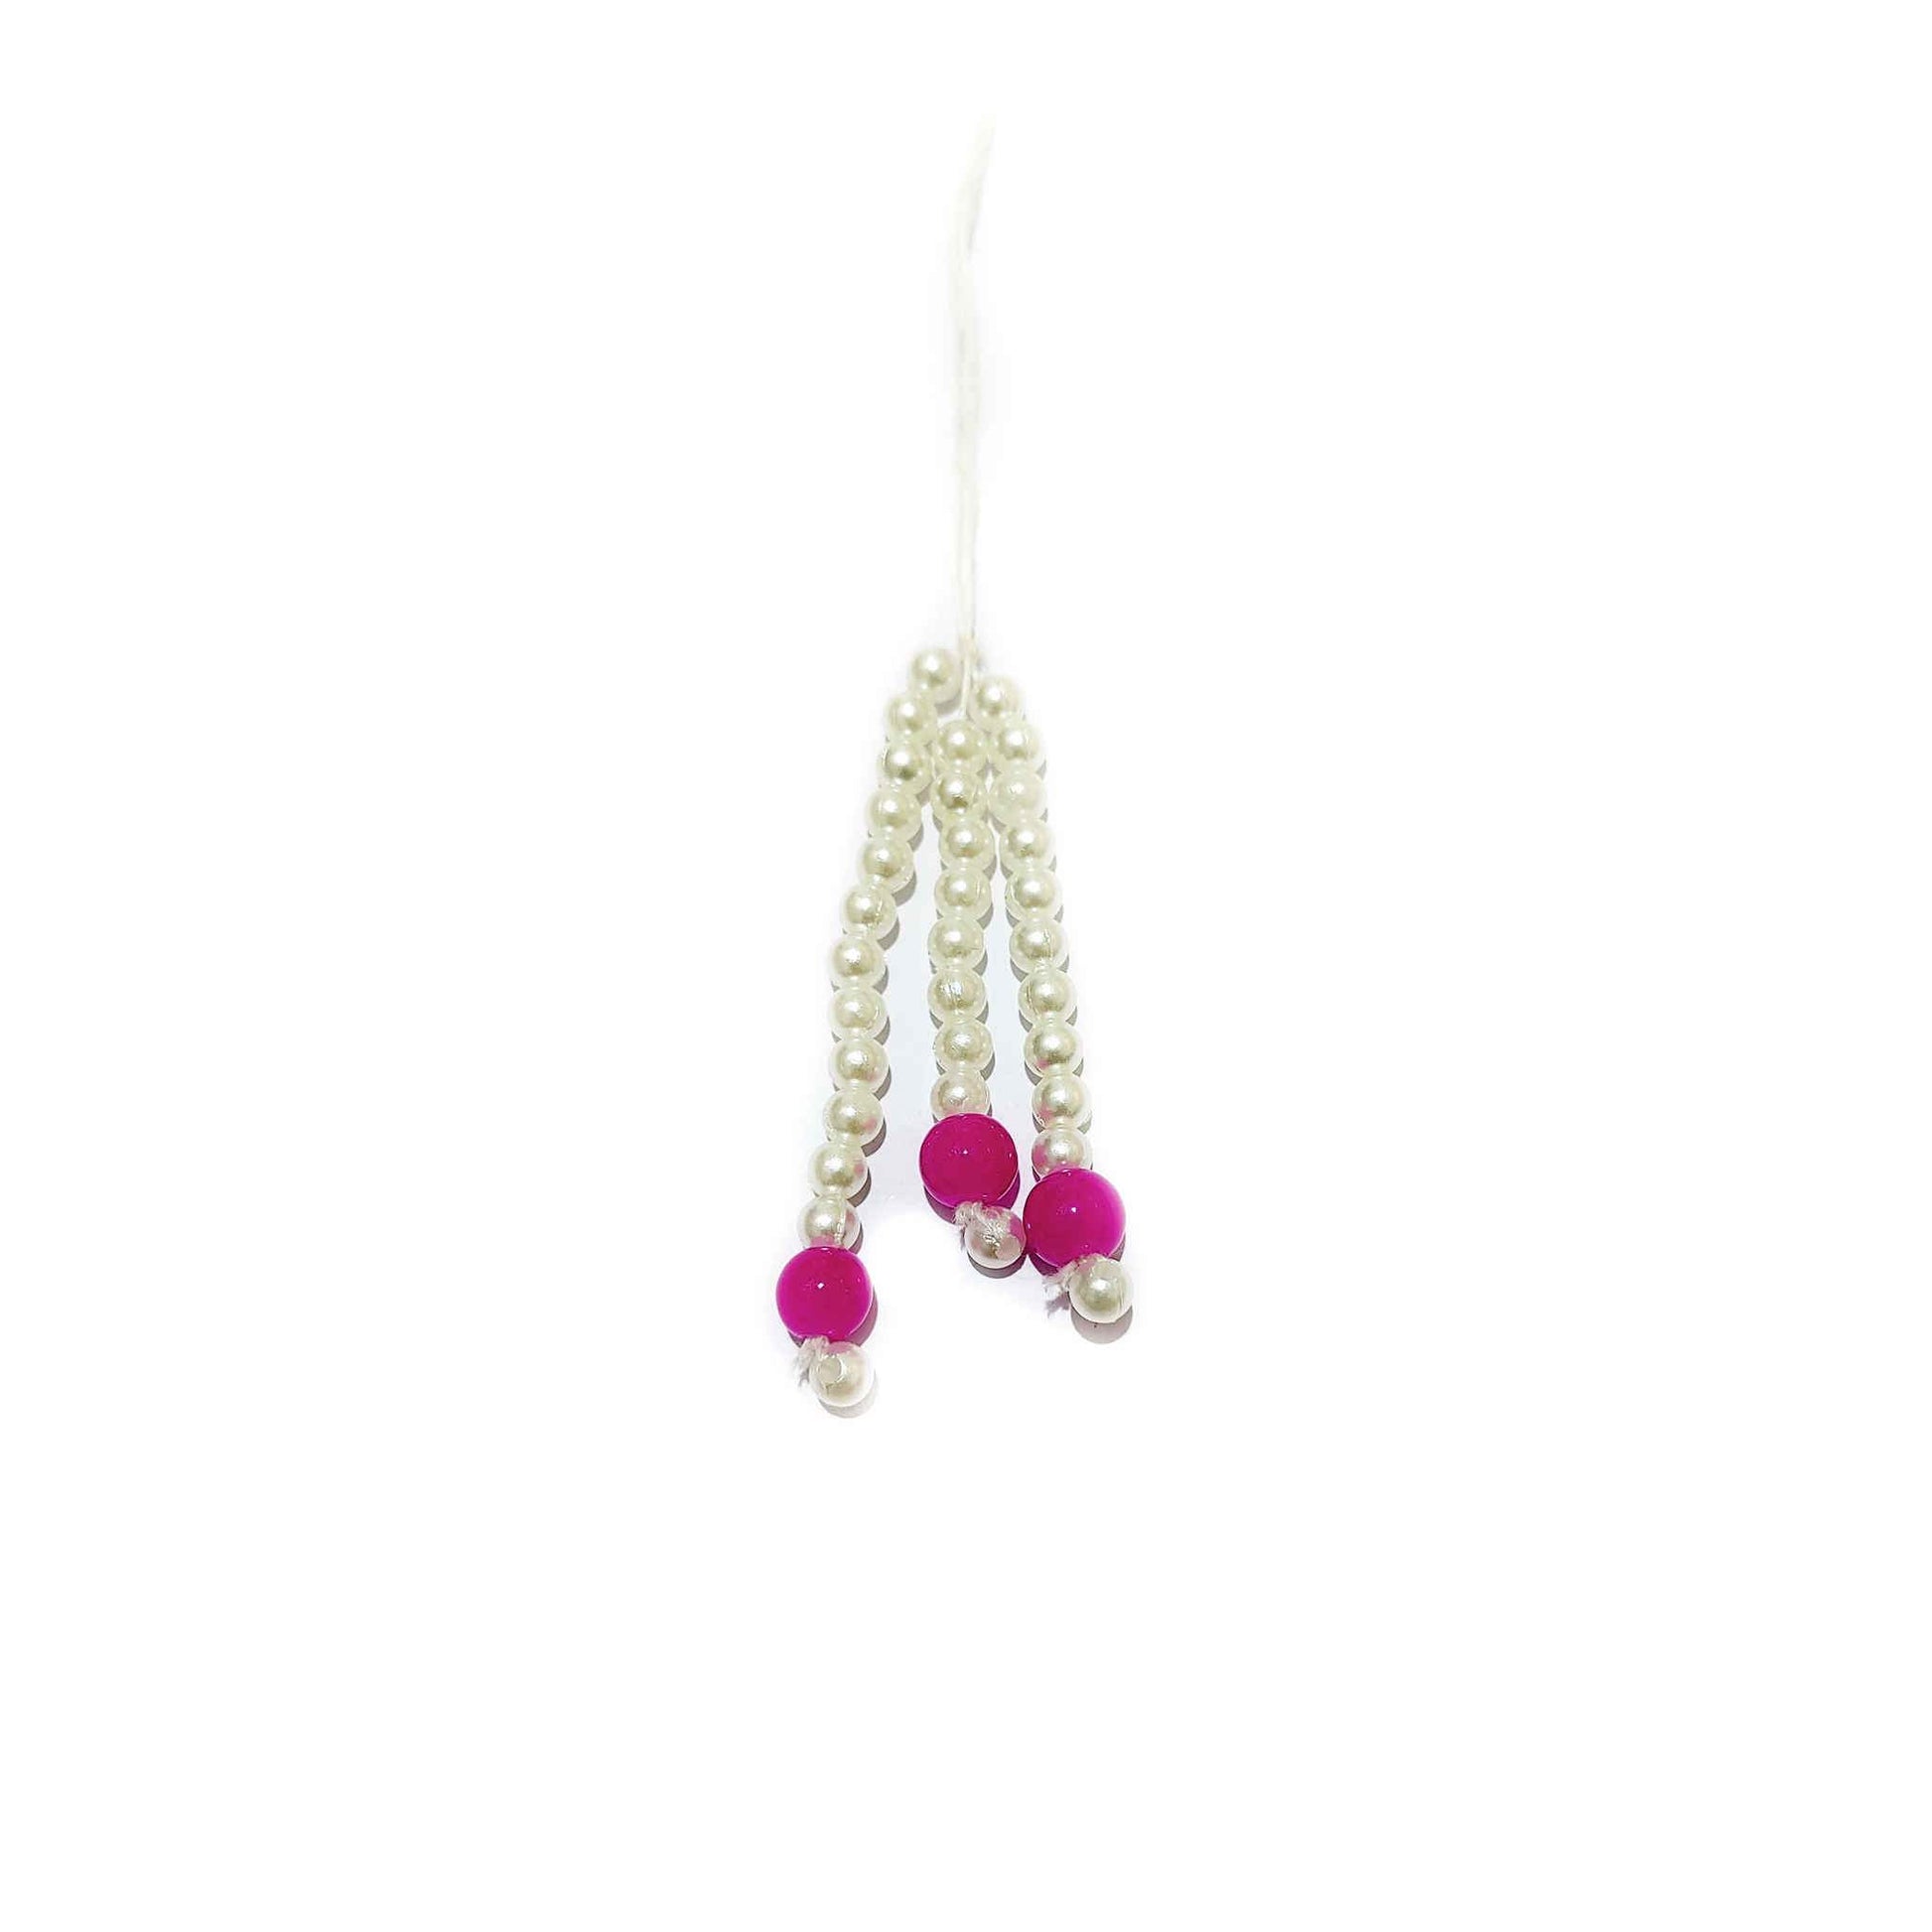 Indian Petals Mini Pearl Beads Handmade DIY Craft, Jewelry Fringe Tassel with Colored Beads - Design 826